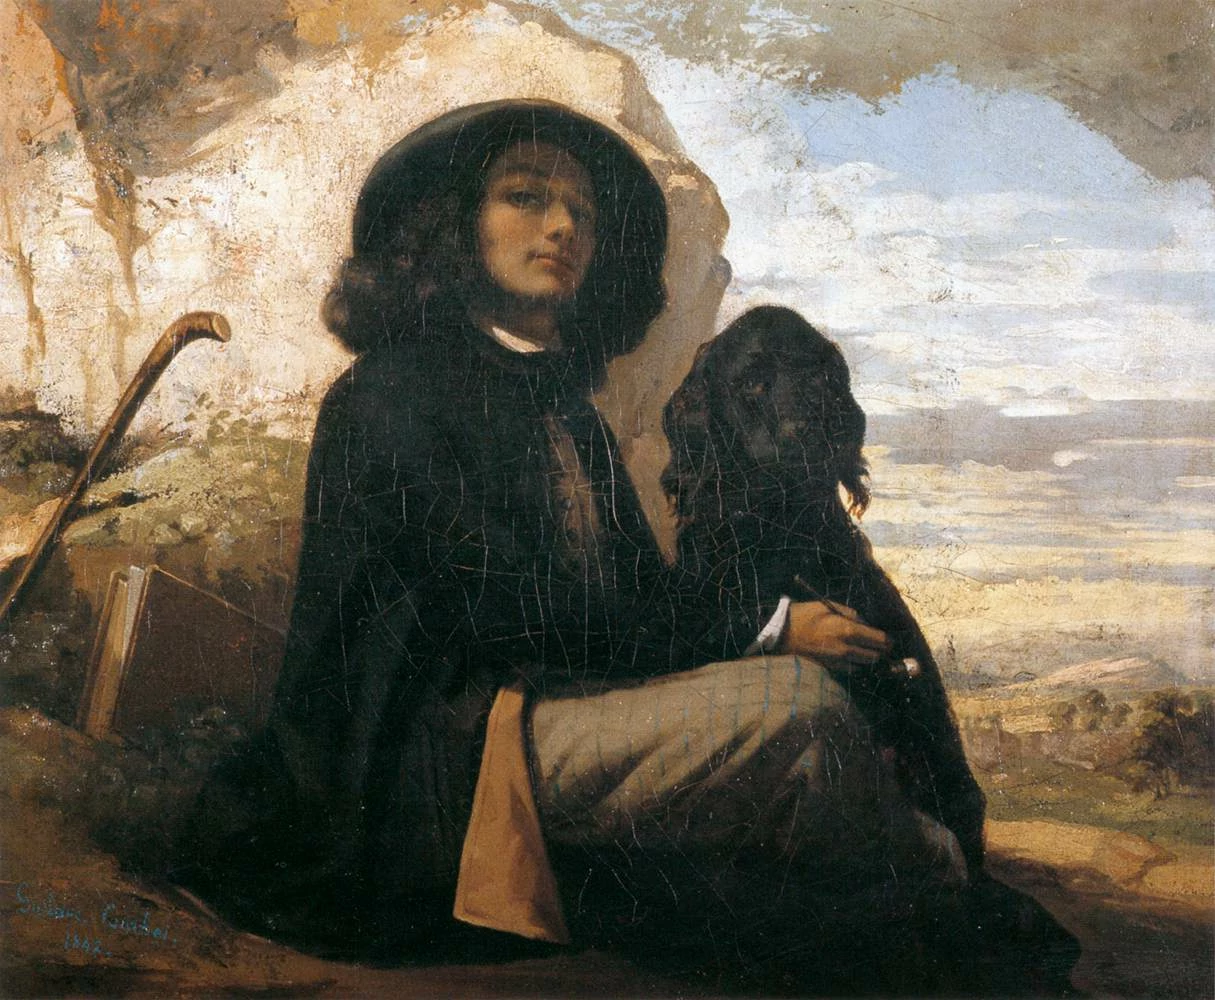 Self Portrait with Black Dog, Gustave Courbet